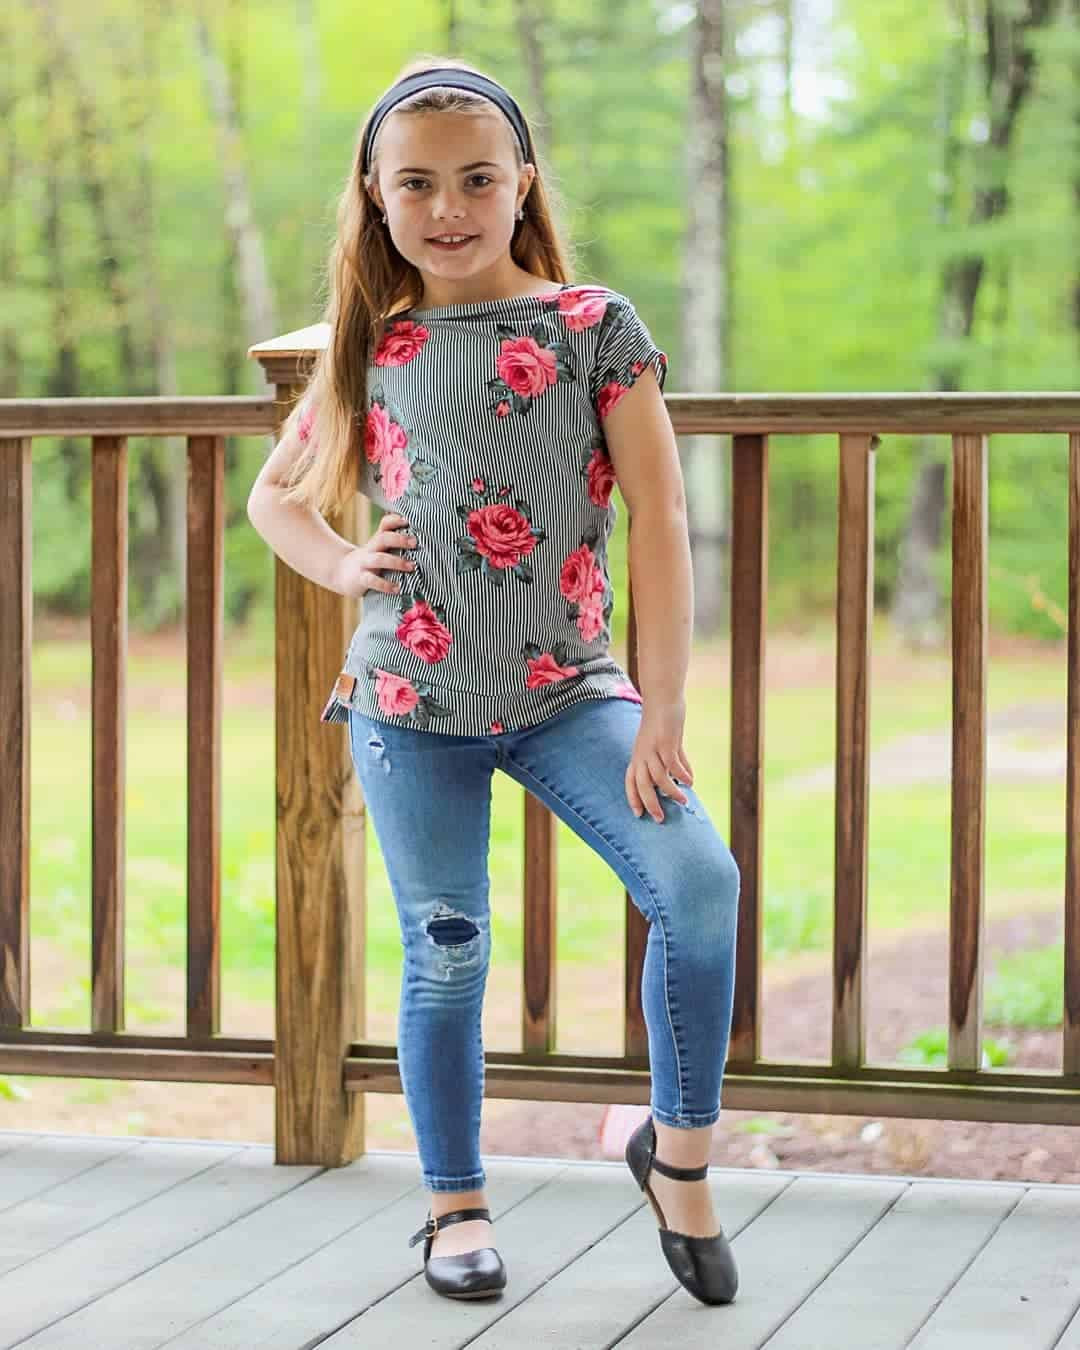 Kids Fashion 2020
 Top 7 kids clothes 2020 trends Insights on Baby Girl and